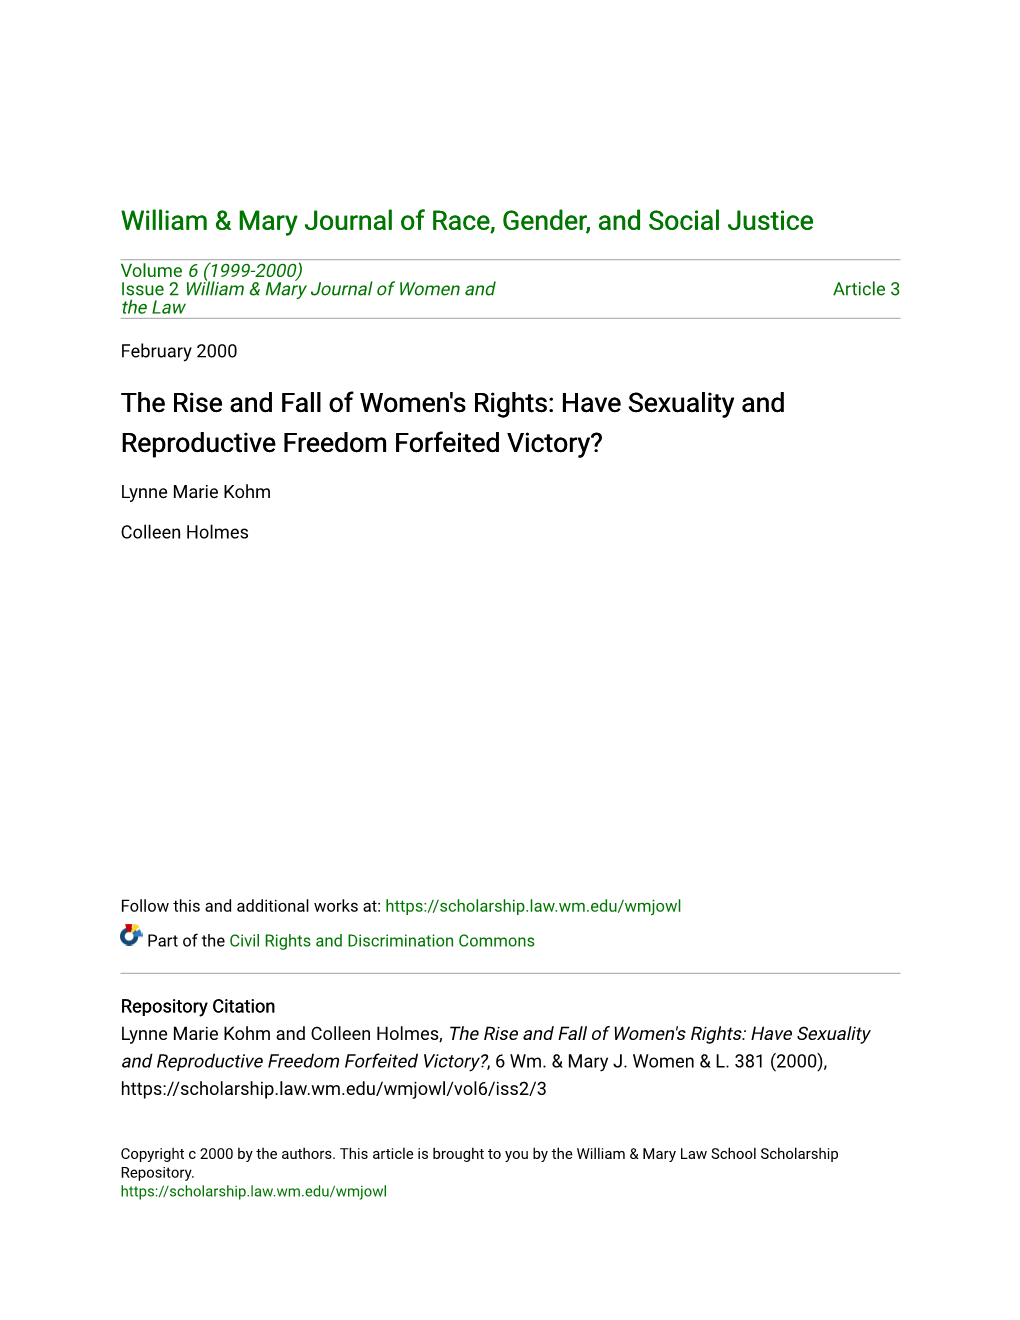 The Rise and Fall of Women's Rights: Have Sexuality and Reproductive Freedom Forfeited Victory?